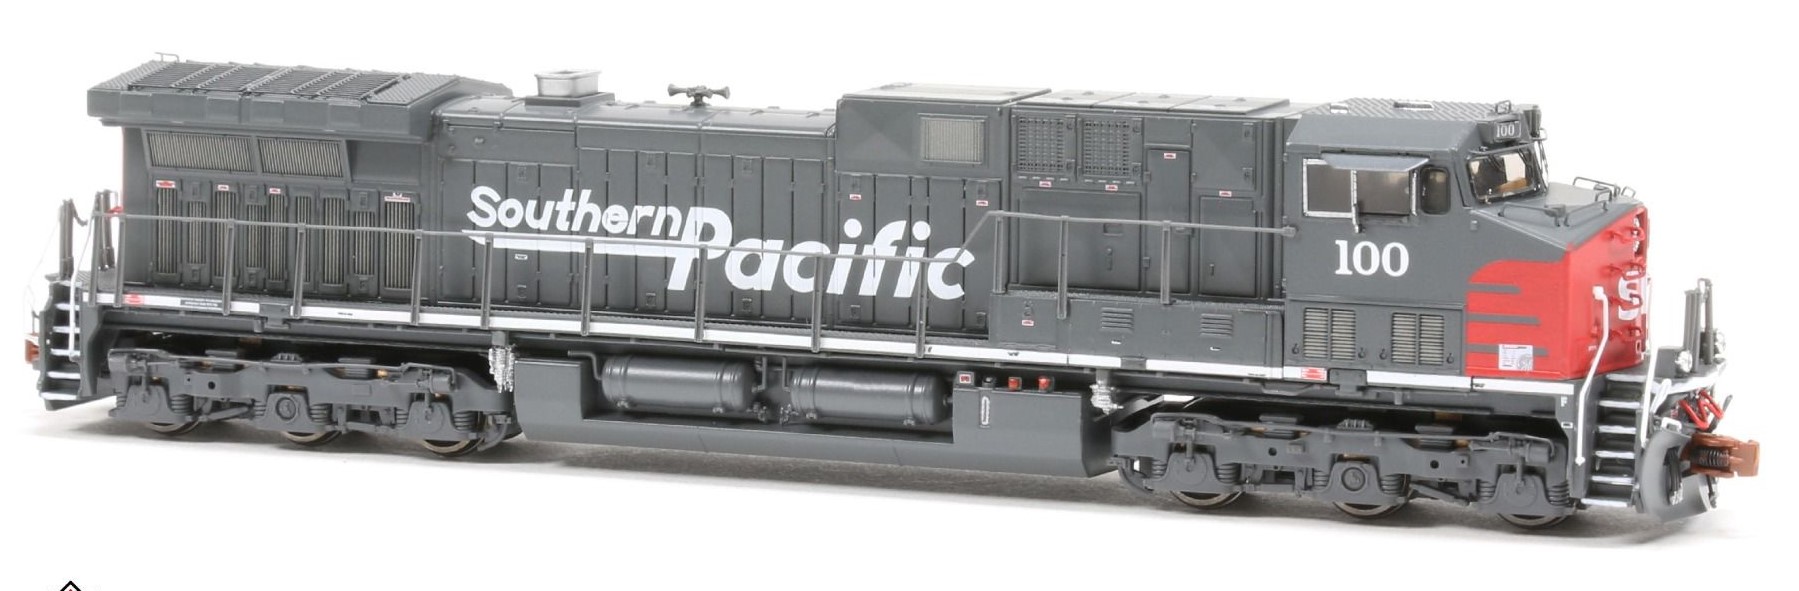 ScaleTrains Rivet Counter N SXT39127 DCC/ESU LokSound V5 Equipped GE AC4400CW Locomotive Southern Pacific 'Speed Lettering' Scheme SP #100